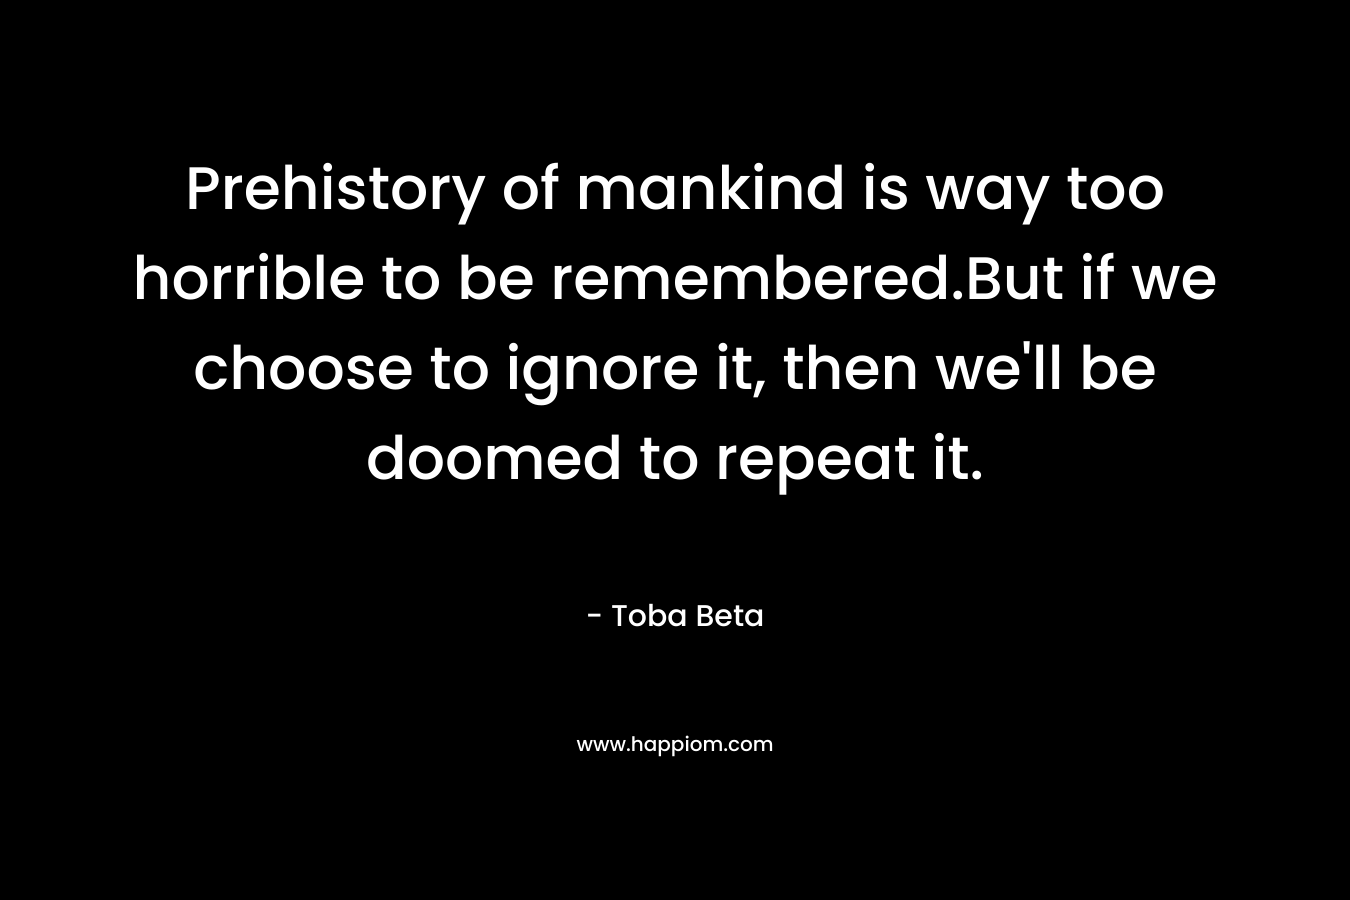 Prehistory of mankind is way too horrible to be remembered.But if we choose to ignore it, then we’ll be doomed to repeat it. – Toba Beta